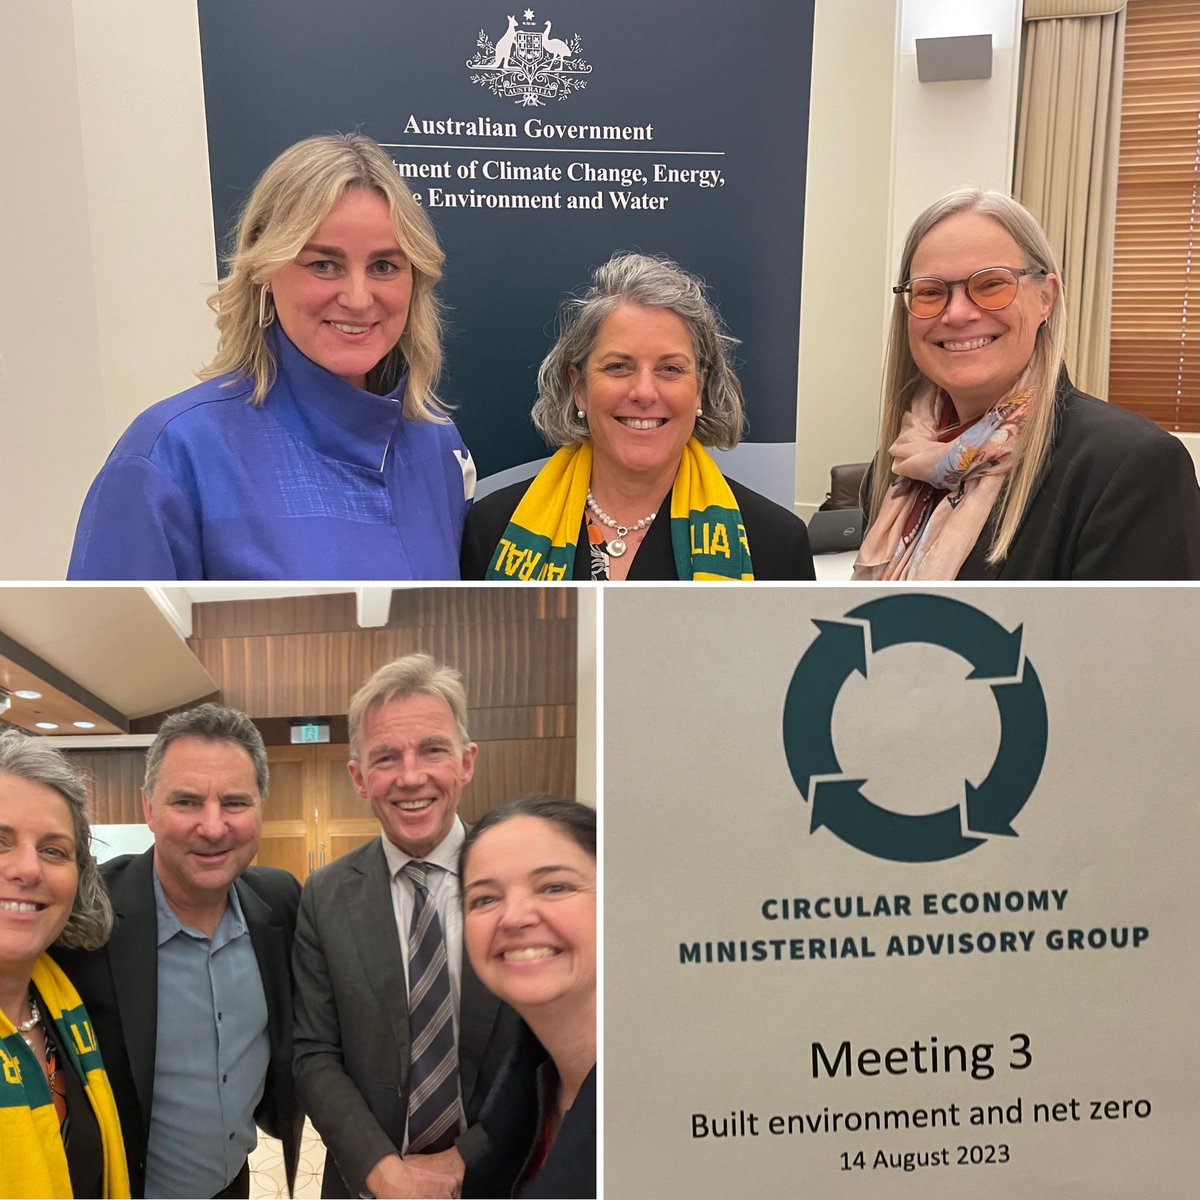 G8 Circular Economy Ministerial Advisory Grp mtg focusing on the built enviro,infra&embodied carbon

@Dominique_Hes @LisaMcLeanAUS & I presented on work from our recent RT

@rooney_davina & @MikeZorbas presented a built enviro deepdive

@jwthwaites @DrLarryMarshall @DrCathyFoley